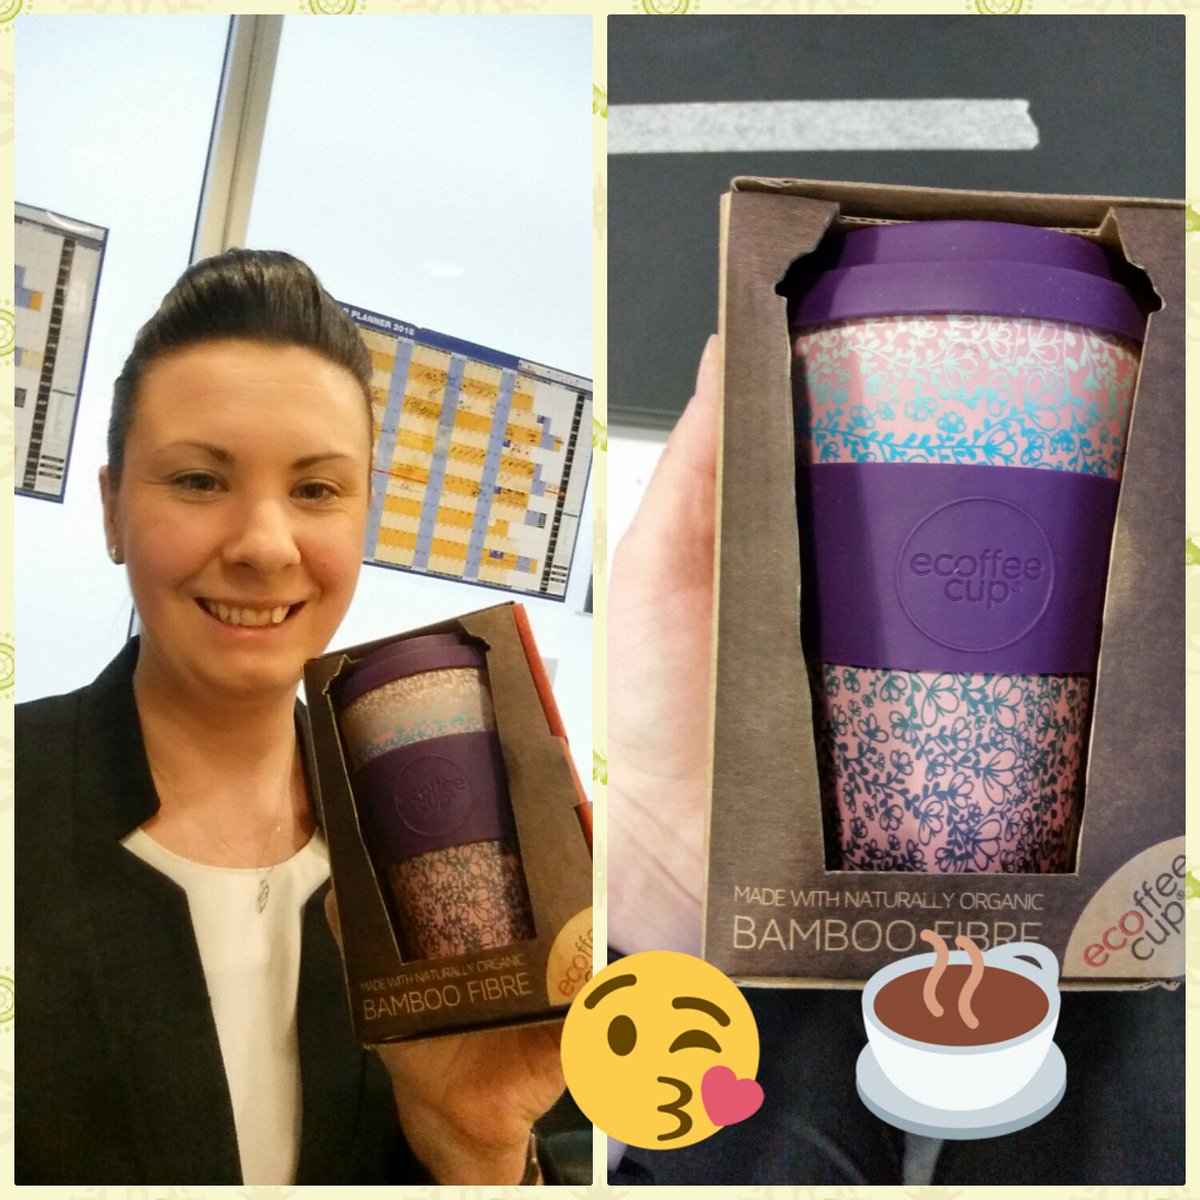 A happy own cup owner. 😍😊I will save ~300 papercups😲 a year with this!😉 #happy #owncup @iamivank  @LondonReedy @MarcinJoze  @Neringa57622386 @ZM876 @marine_casier